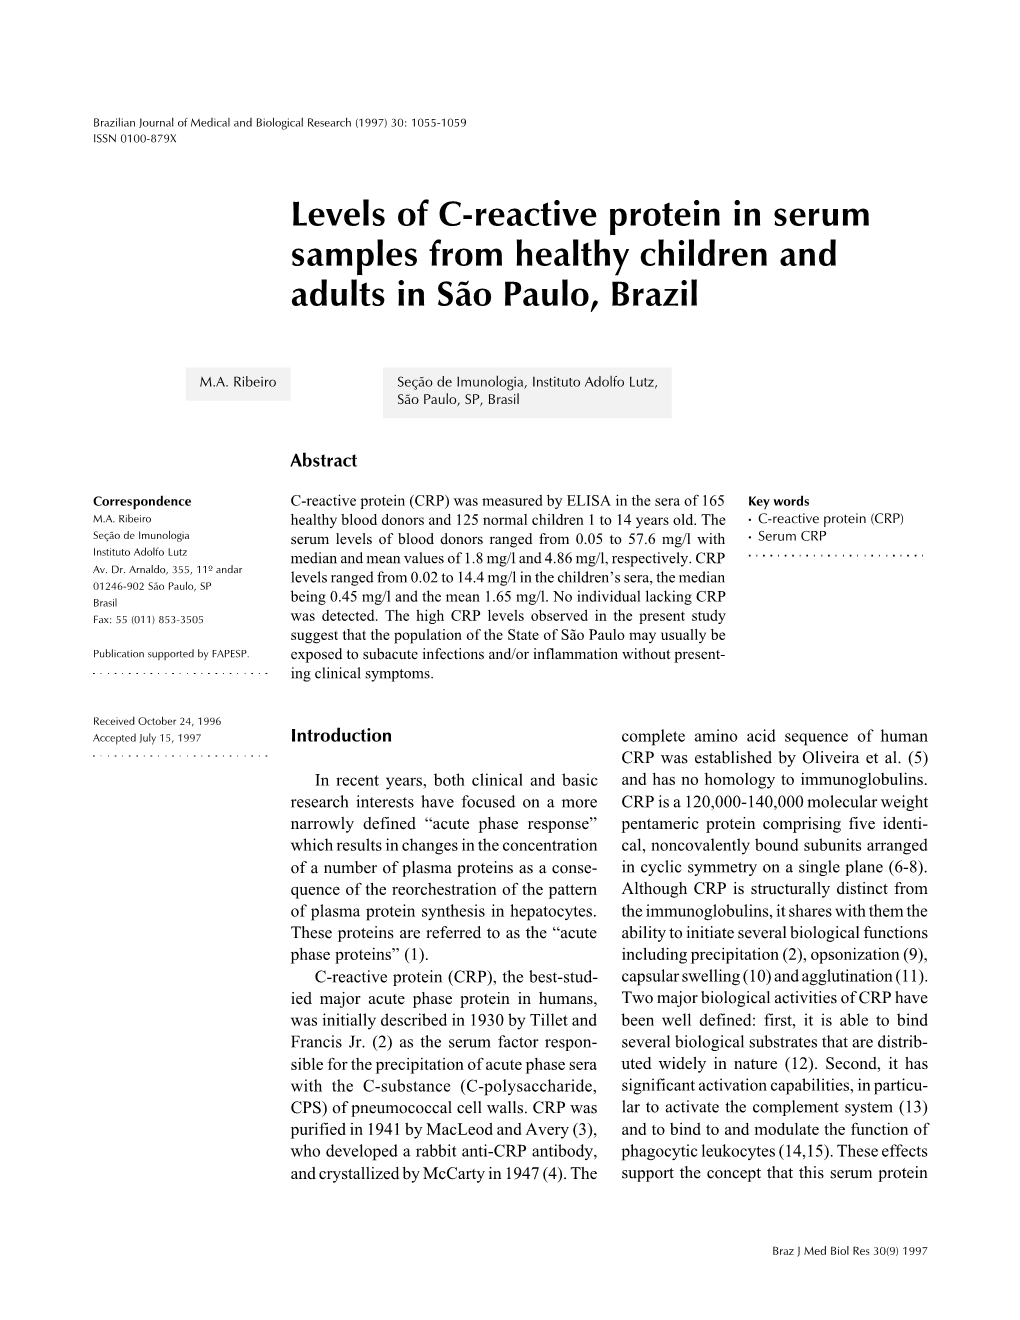 Levels of C-Reactive Protein in Serum Samples from Healthy Children and Adults in São Paulo, Brazil